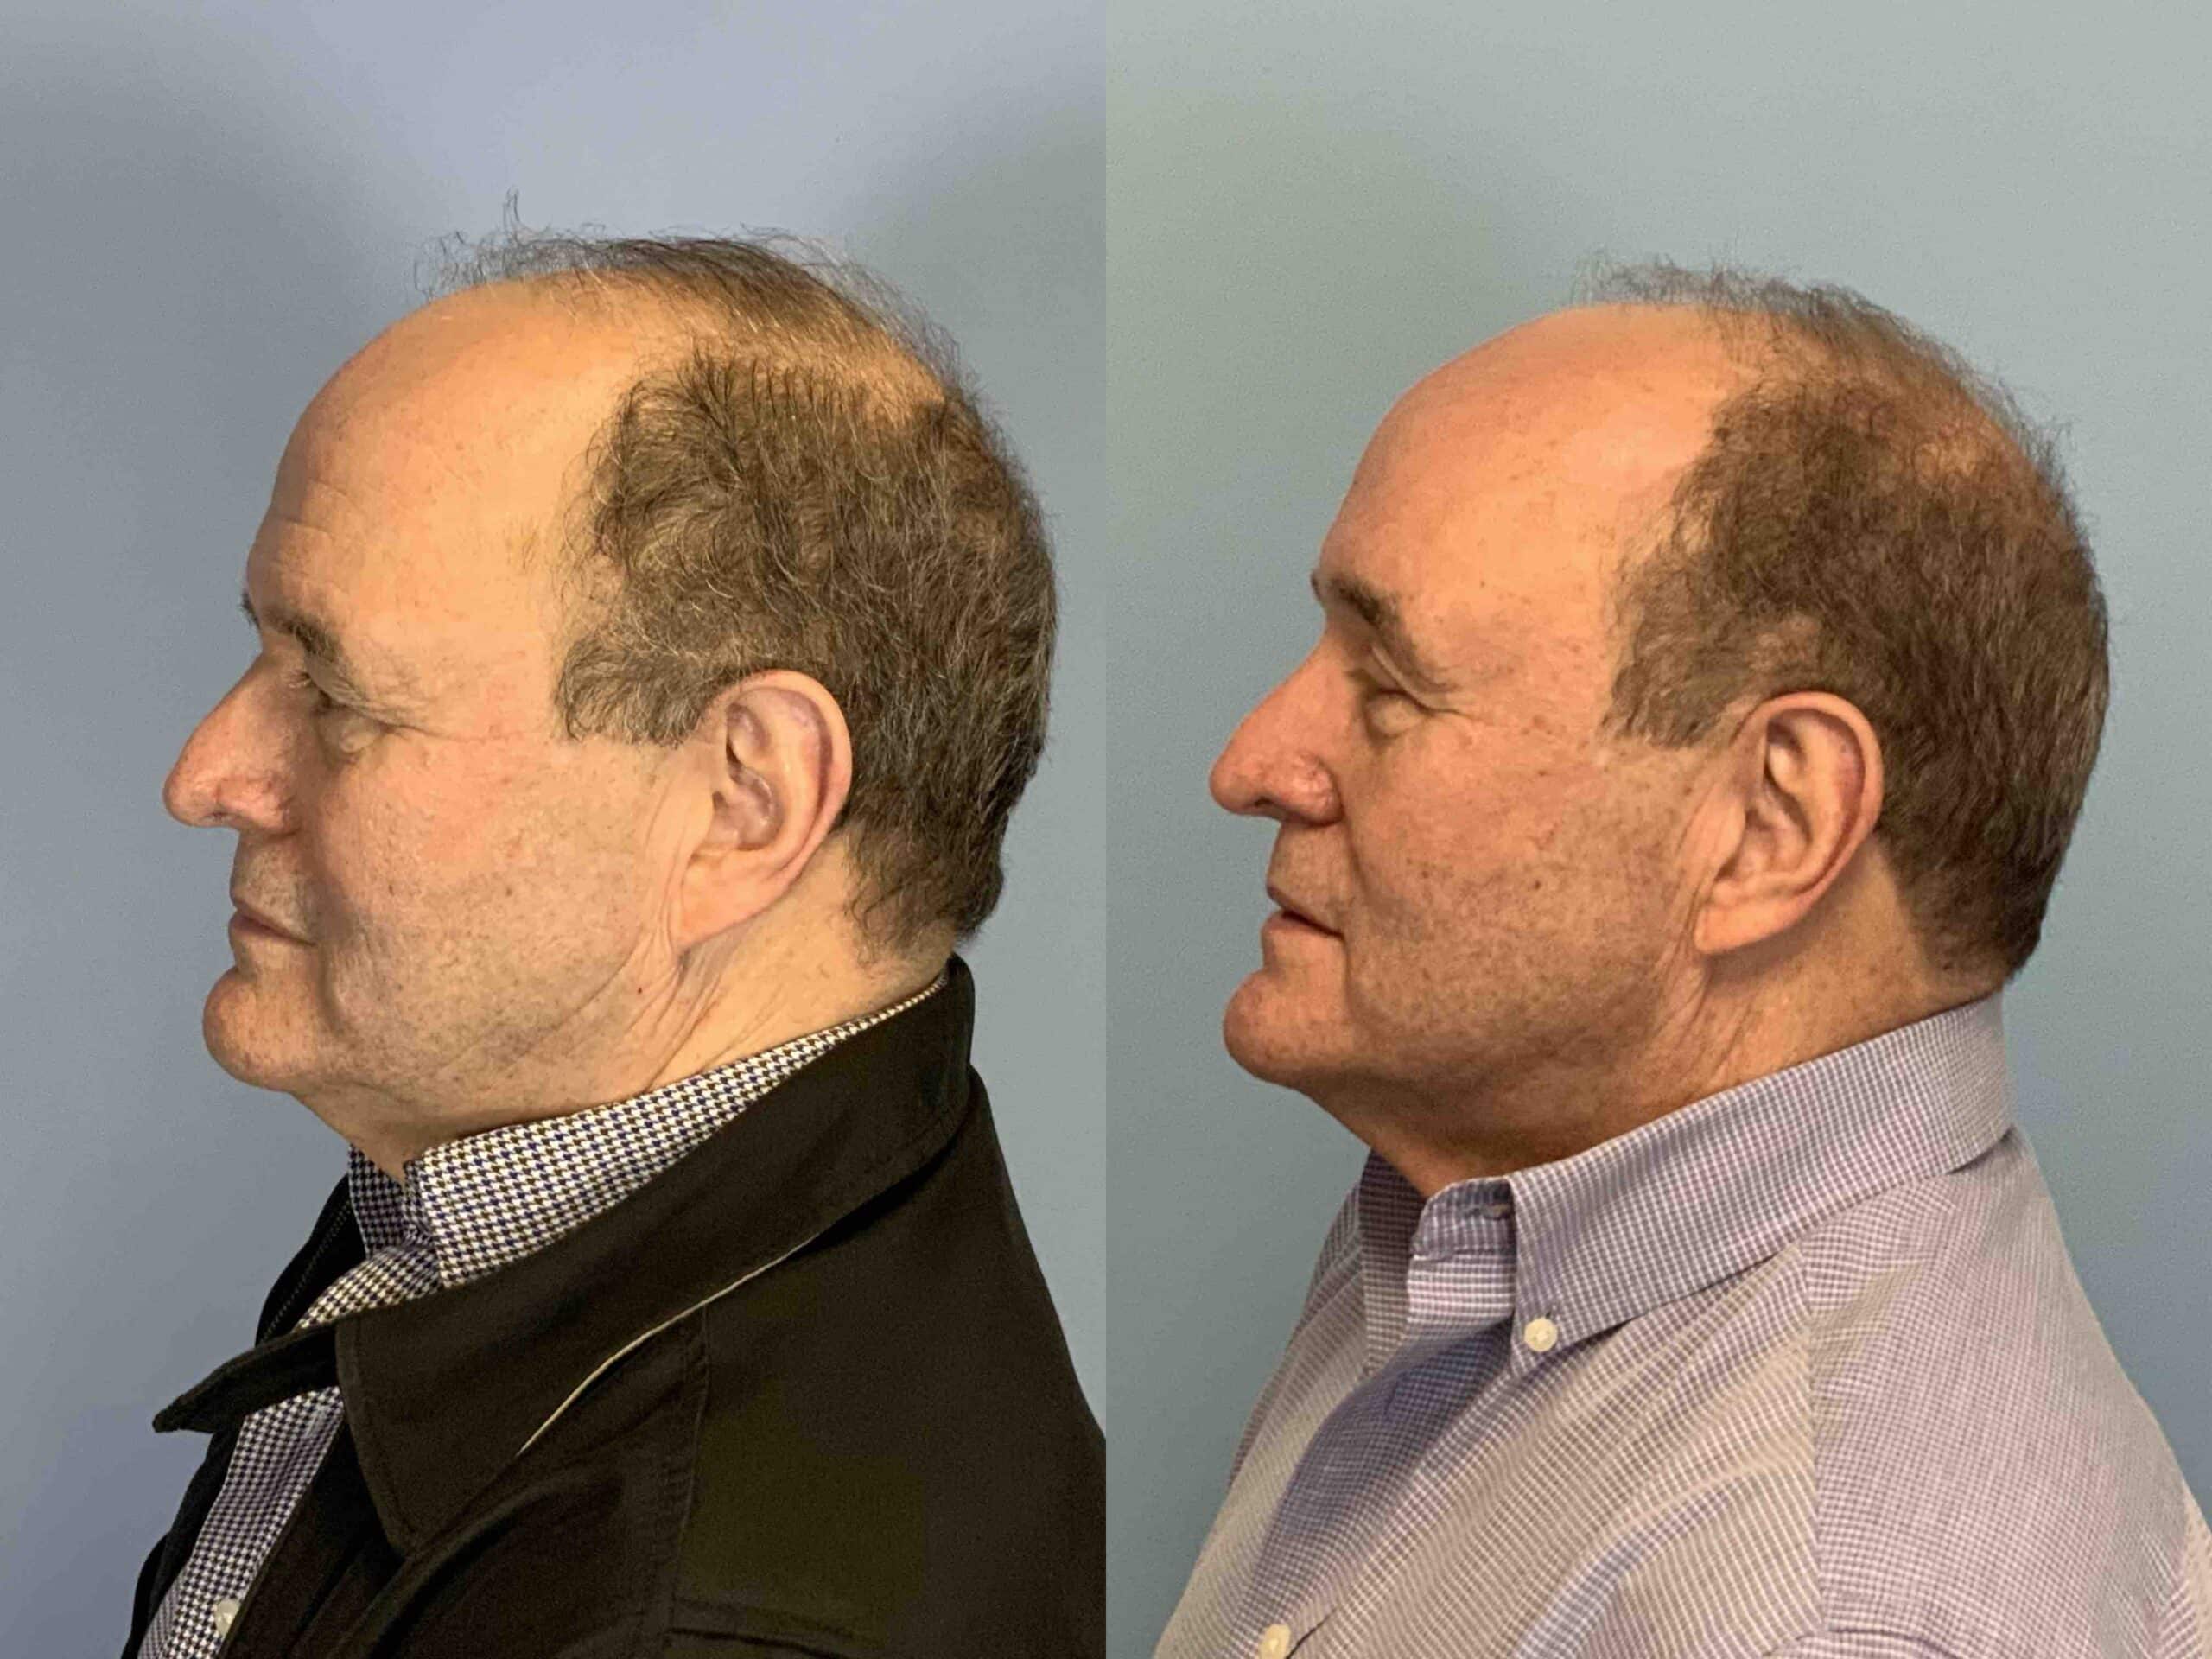 Before and after, 4 mo post op from Endo Brow Lift, Upper Blepharoplasty performed by Dr. Paul Vanek (side view)